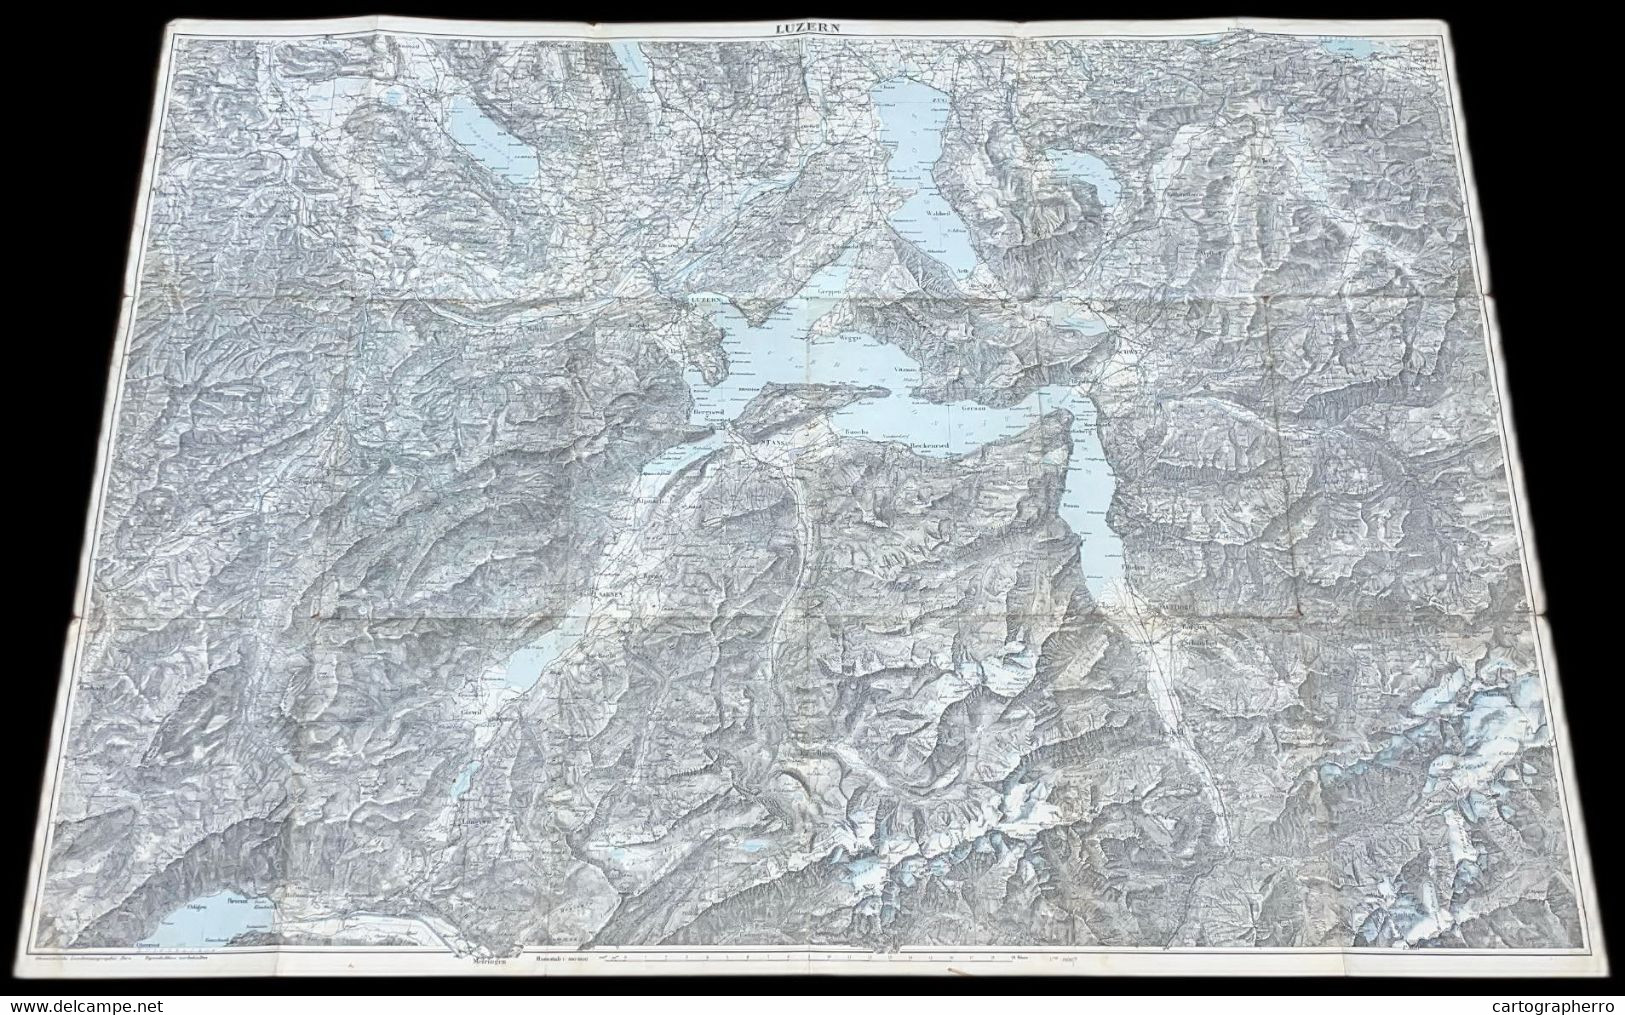 Topographical Map Switzerland Luzern Scale 1:100.000 - Cartes Topographiques